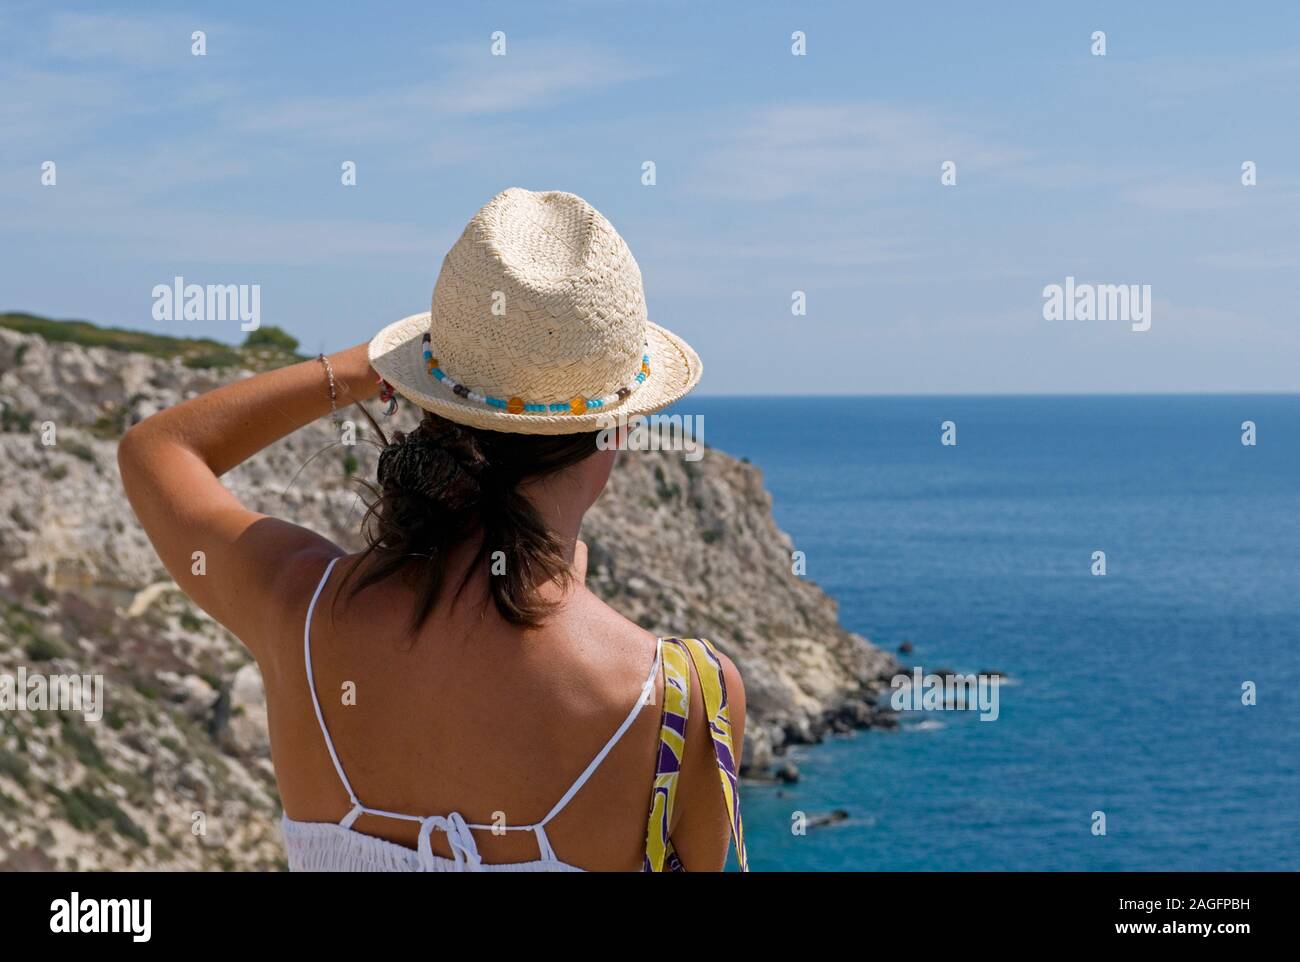 young woman with sunhat taking pictures, Salento, Apulia, Italy Stock Photo